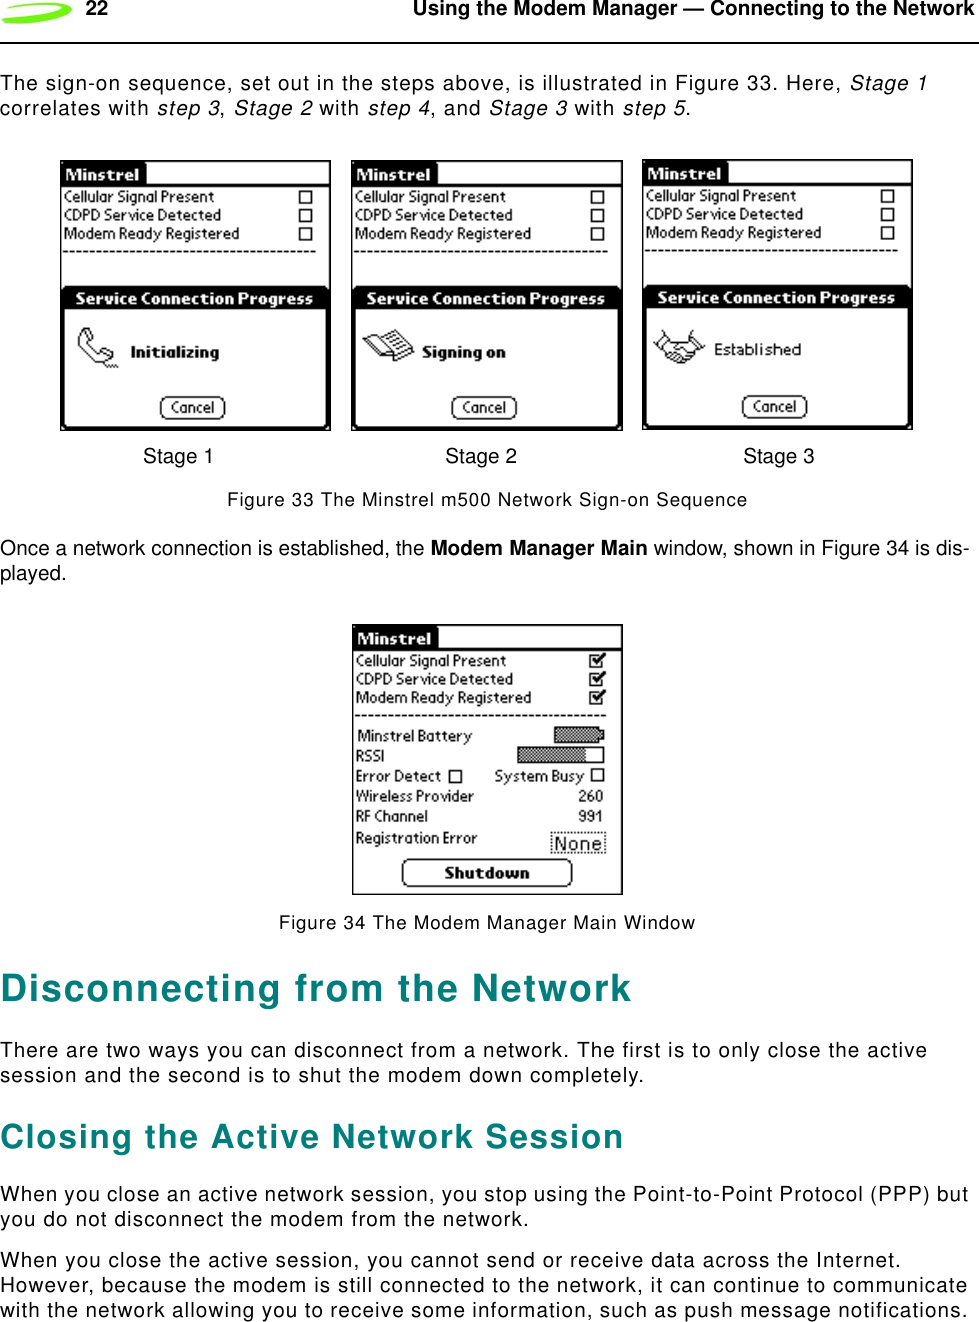 22 Using the Modem Manager — Connecting to the NetworkThe sign-on sequence, set out in the steps above, is illustrated in Figure 33. Here, Stage 1 correlates with step 3, Stage 2 with step 4, and Stage 3 with step 5.Figure 33 The Minstrel m500 Network Sign-on SequenceOnce a network connection is established, the Modem Manager Main window, shown in Figure 34 is dis-played.Figure 34 The Modem Manager Main WindowDisconnecting from the NetworkThere are two ways you can disconnect from a network. The first is to only close the active session and the second is to shut the modem down completely.Closing the Active Network SessionWhen you close an active network session, you stop using the Point-to-Point Protocol (PPP) but you do not disconnect the modem from the network.When you close the active session, you cannot send or receive data across the Internet. However, because the modem is still connected to the network, it can continue to communicate with the network allowing you to receive some information, such as push message notifications. Stage 1 Stage 2 Stage 3